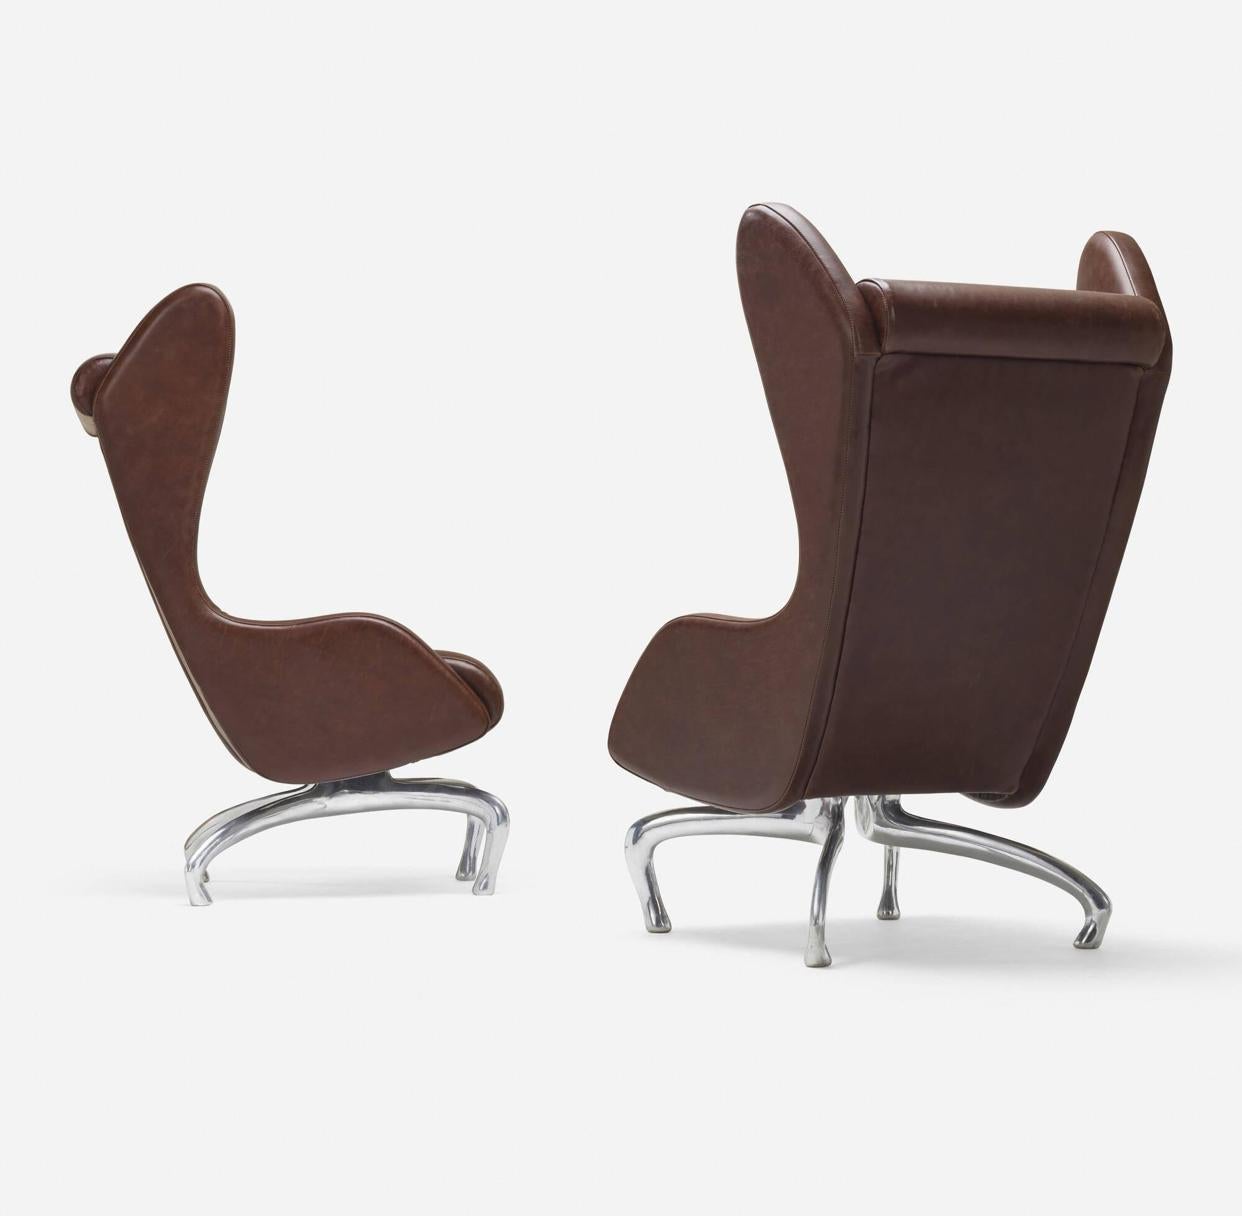 American Jordan Mozer Canter’s Chairs, a Pair For Sale